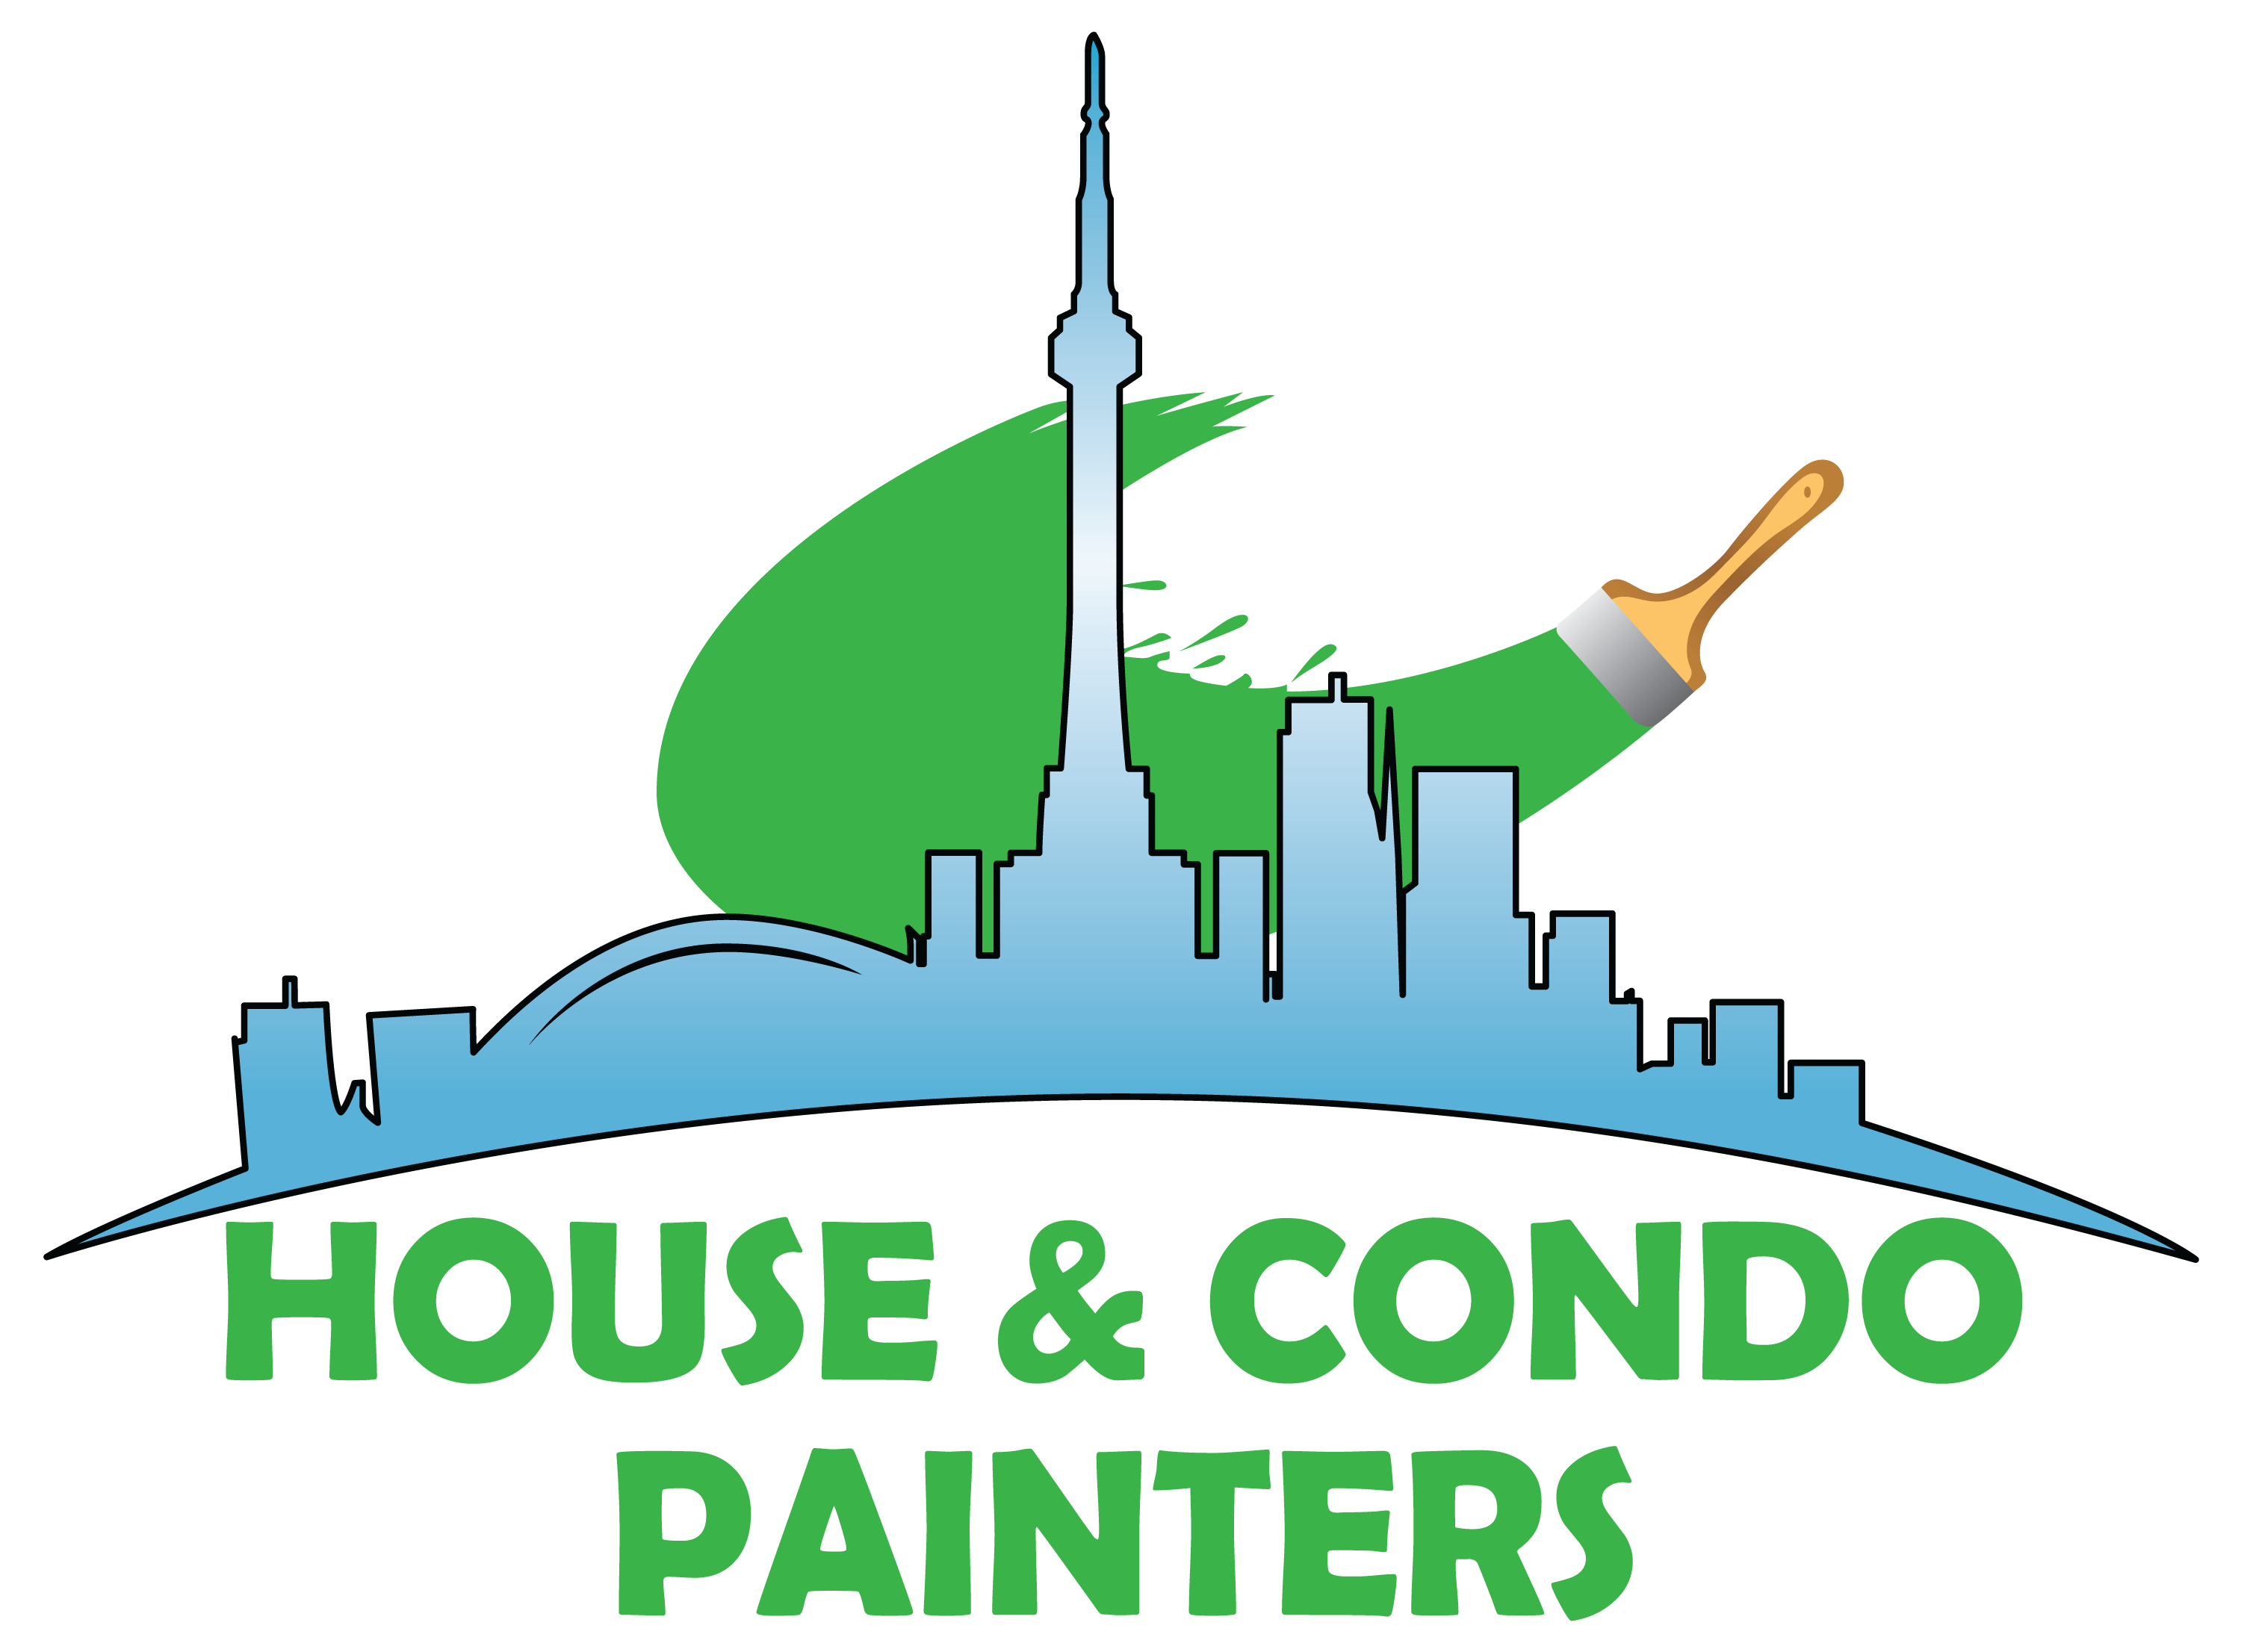 House And Condo Painters 's logo